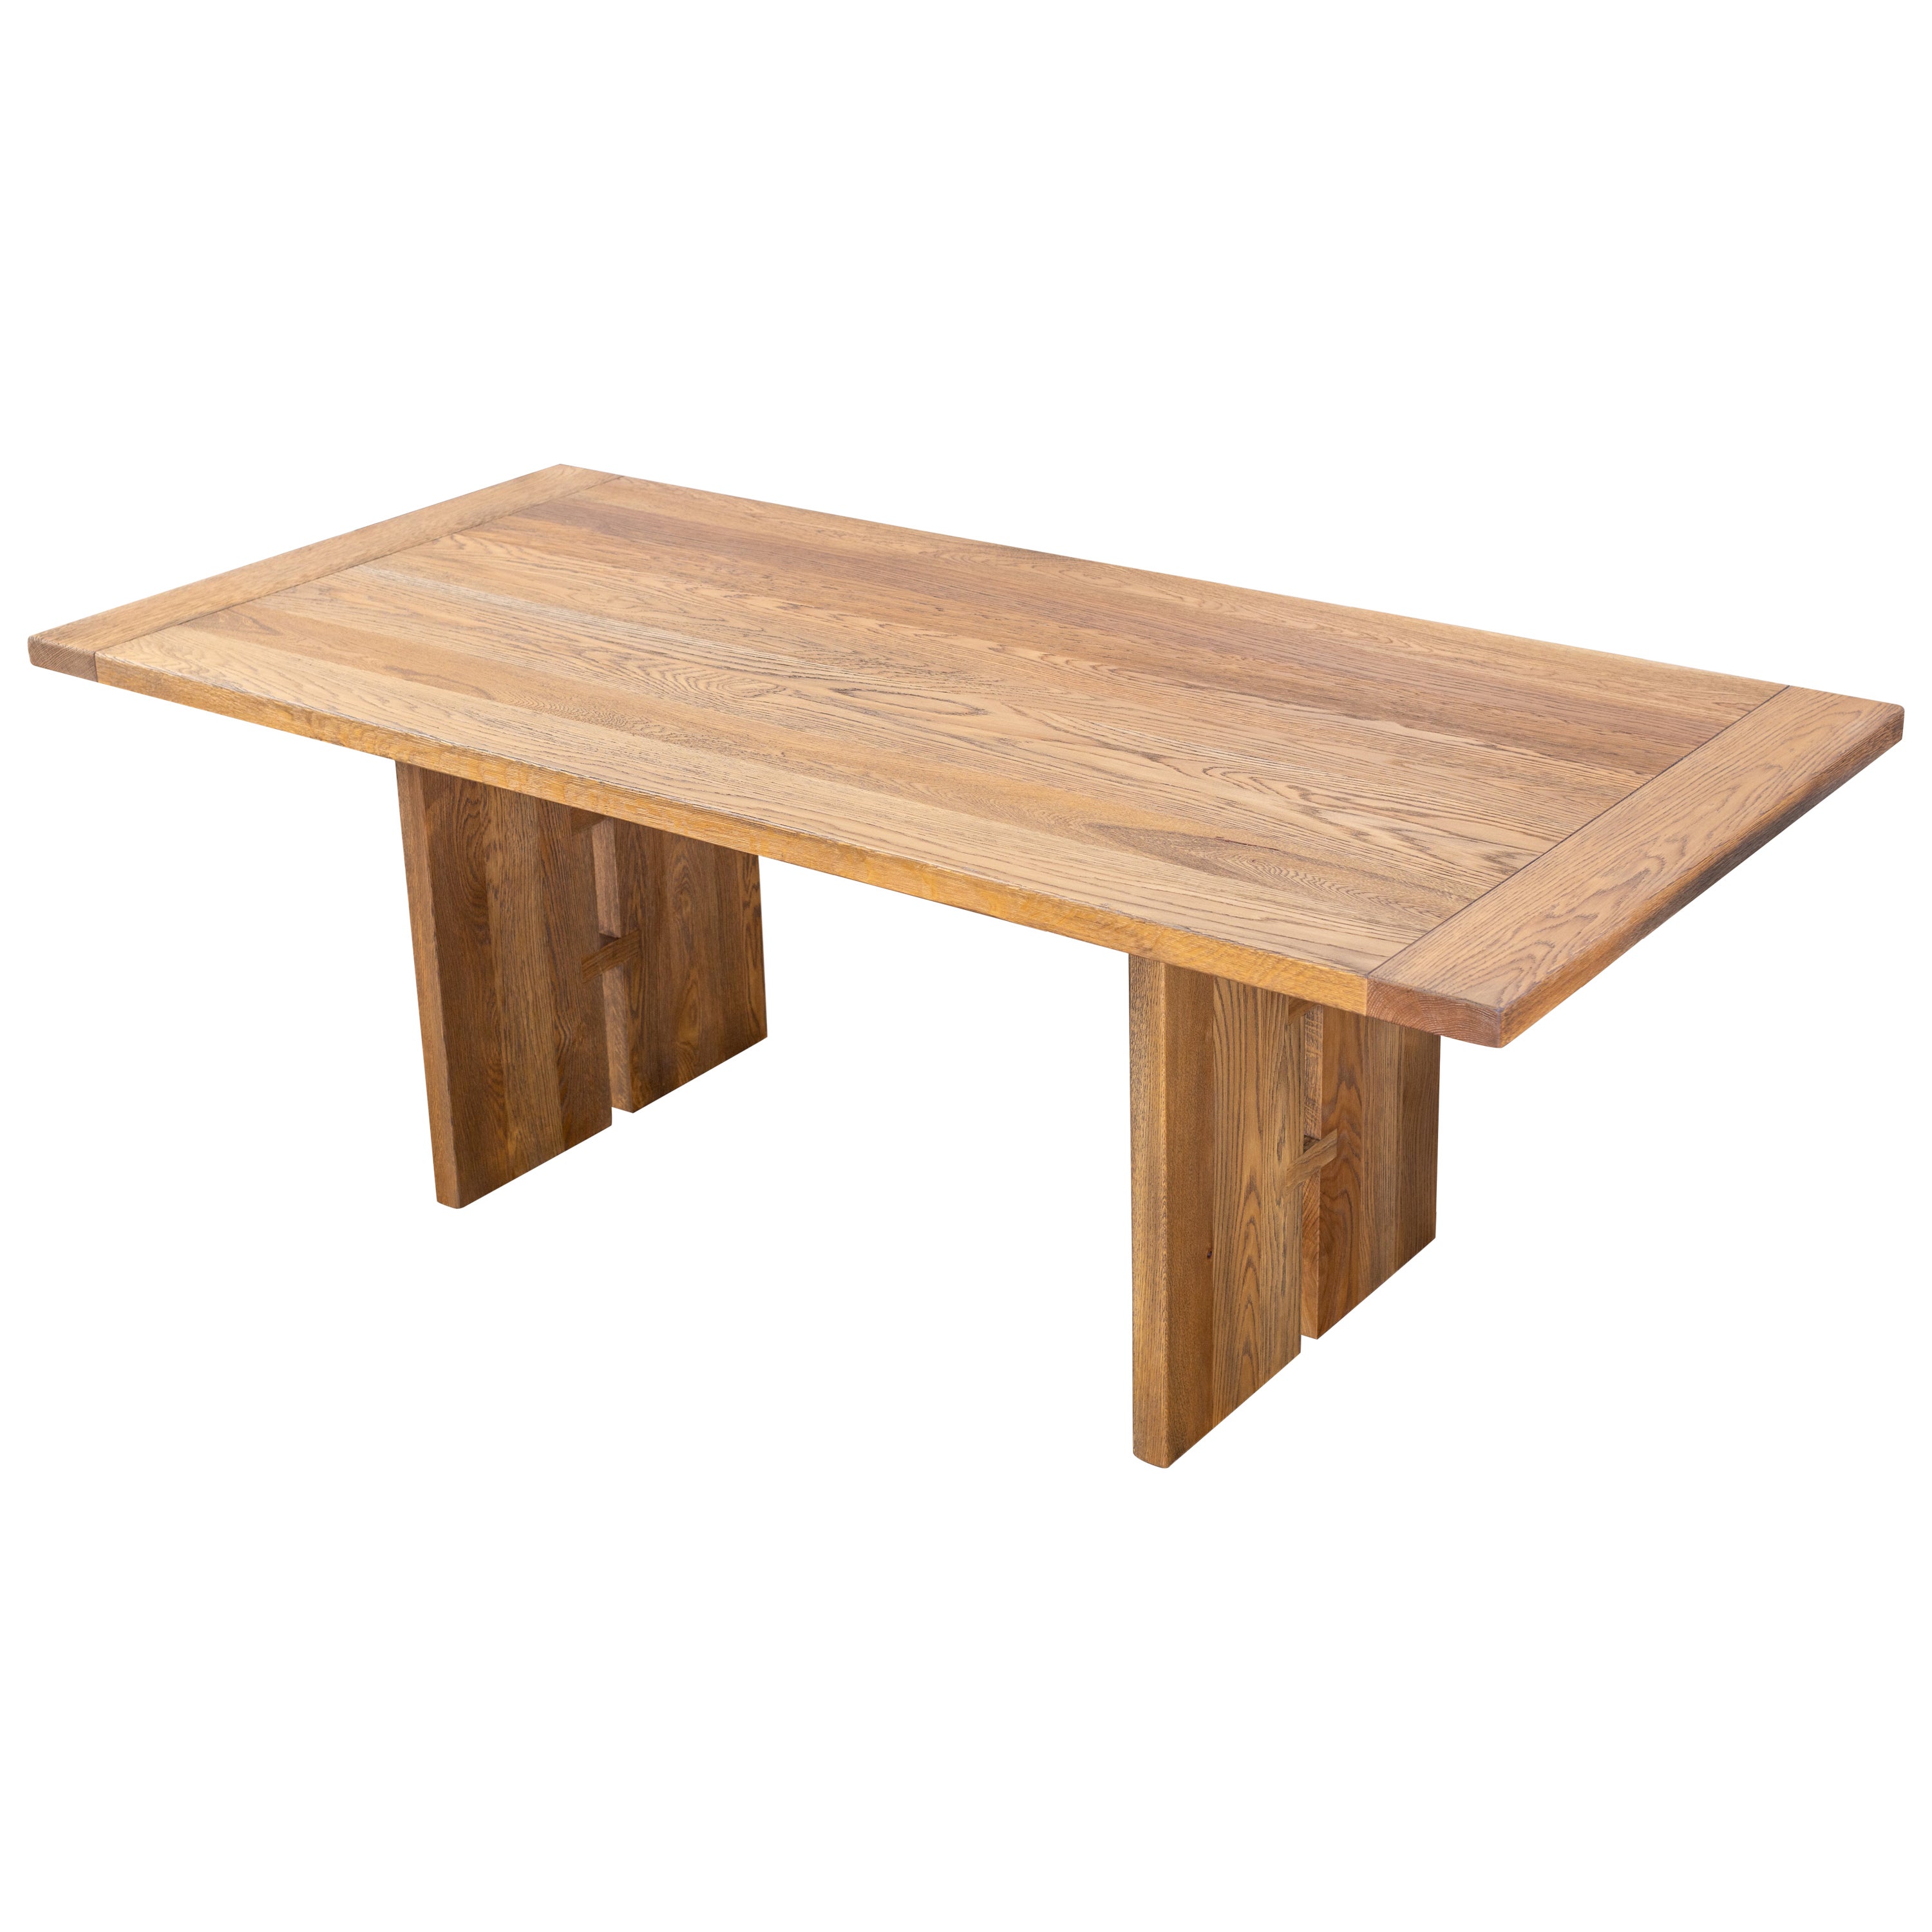 Solid Oak Dining Table with Wood Legs in a Sandblasted Autumn Stain For Sale